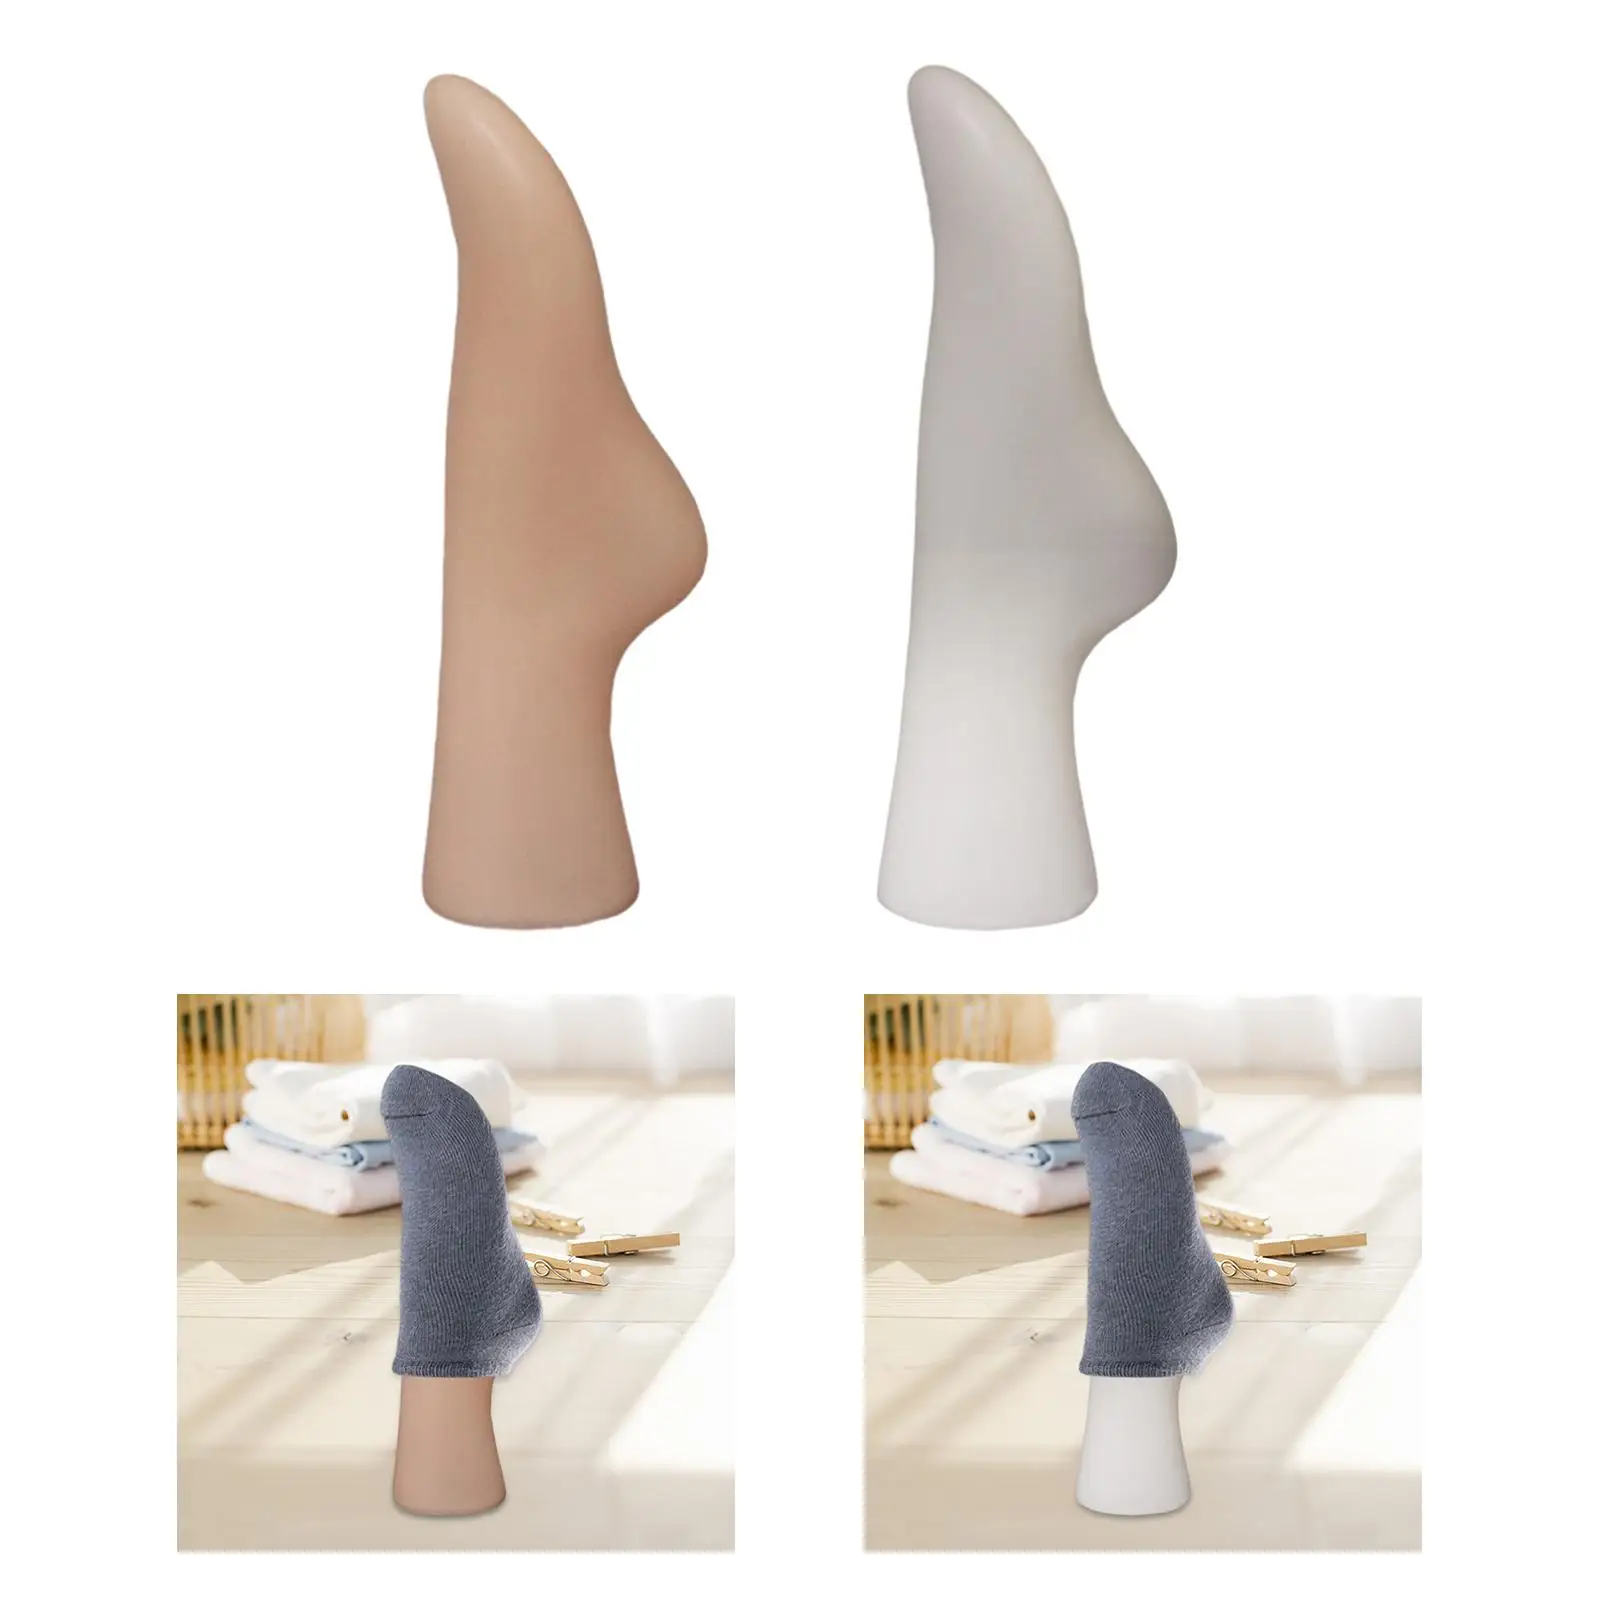 Female Mannequin Foot Stand Rack Women Foot Sock Display Medium Stocking Display for Slippers Shop Retail Chains Jewelry Home